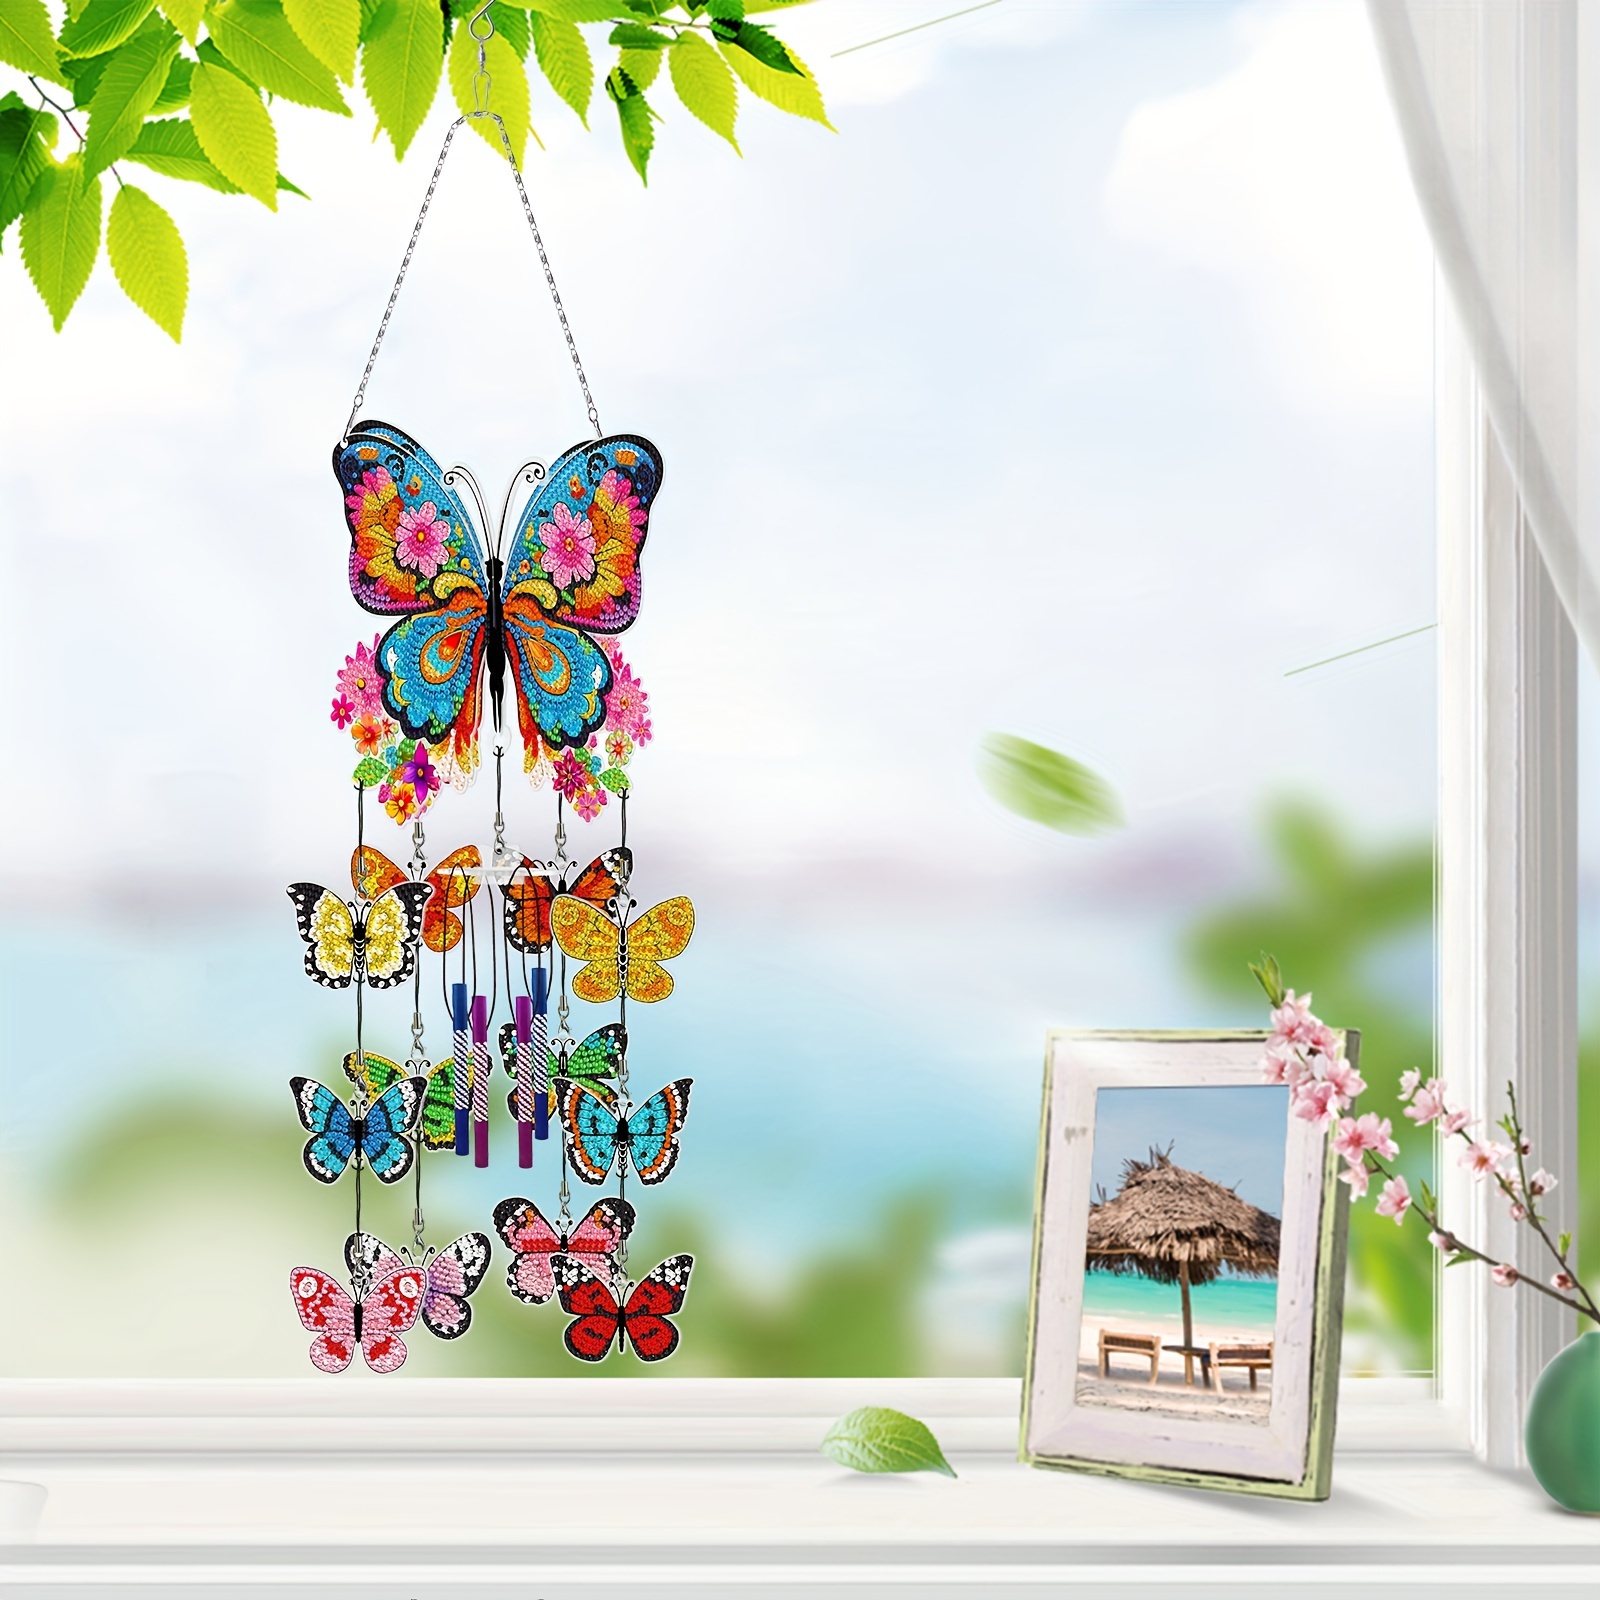 

Diy Diamond Painting Wind Chime Kit - Colorful Butterfly & Floral Design, 3d Handcrafted Pvc Hanging Decor For Home, Garden, And Window